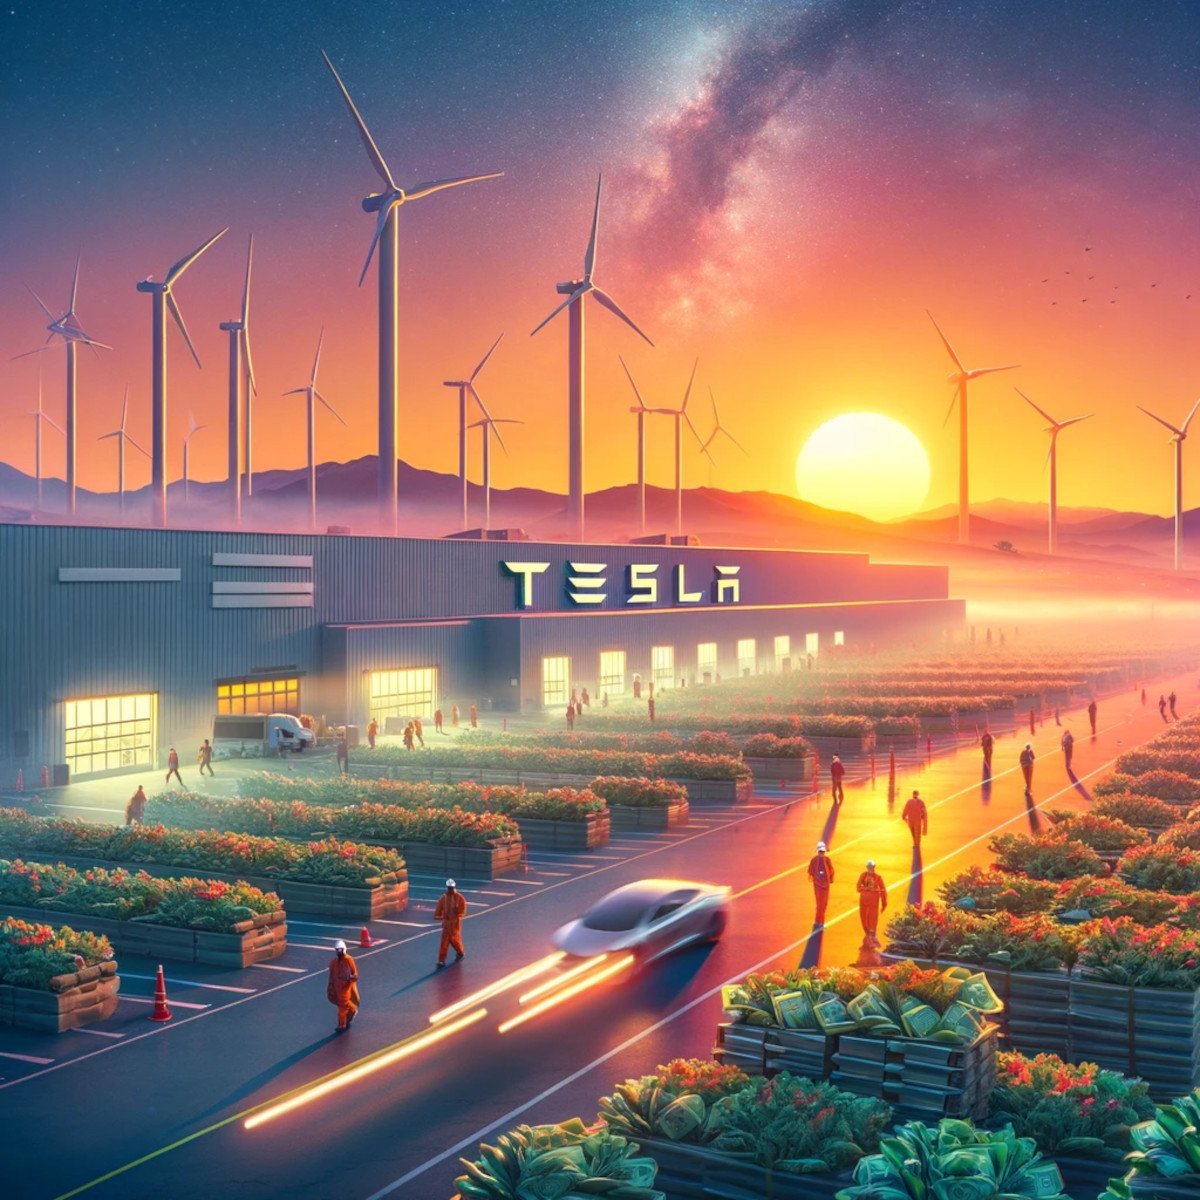 sunrise-at-tesla-gigafactory-nevada-showcasing-workers-arriving-for-a-new-day-a-new-era-vibe-with-a-positive-atmosphere